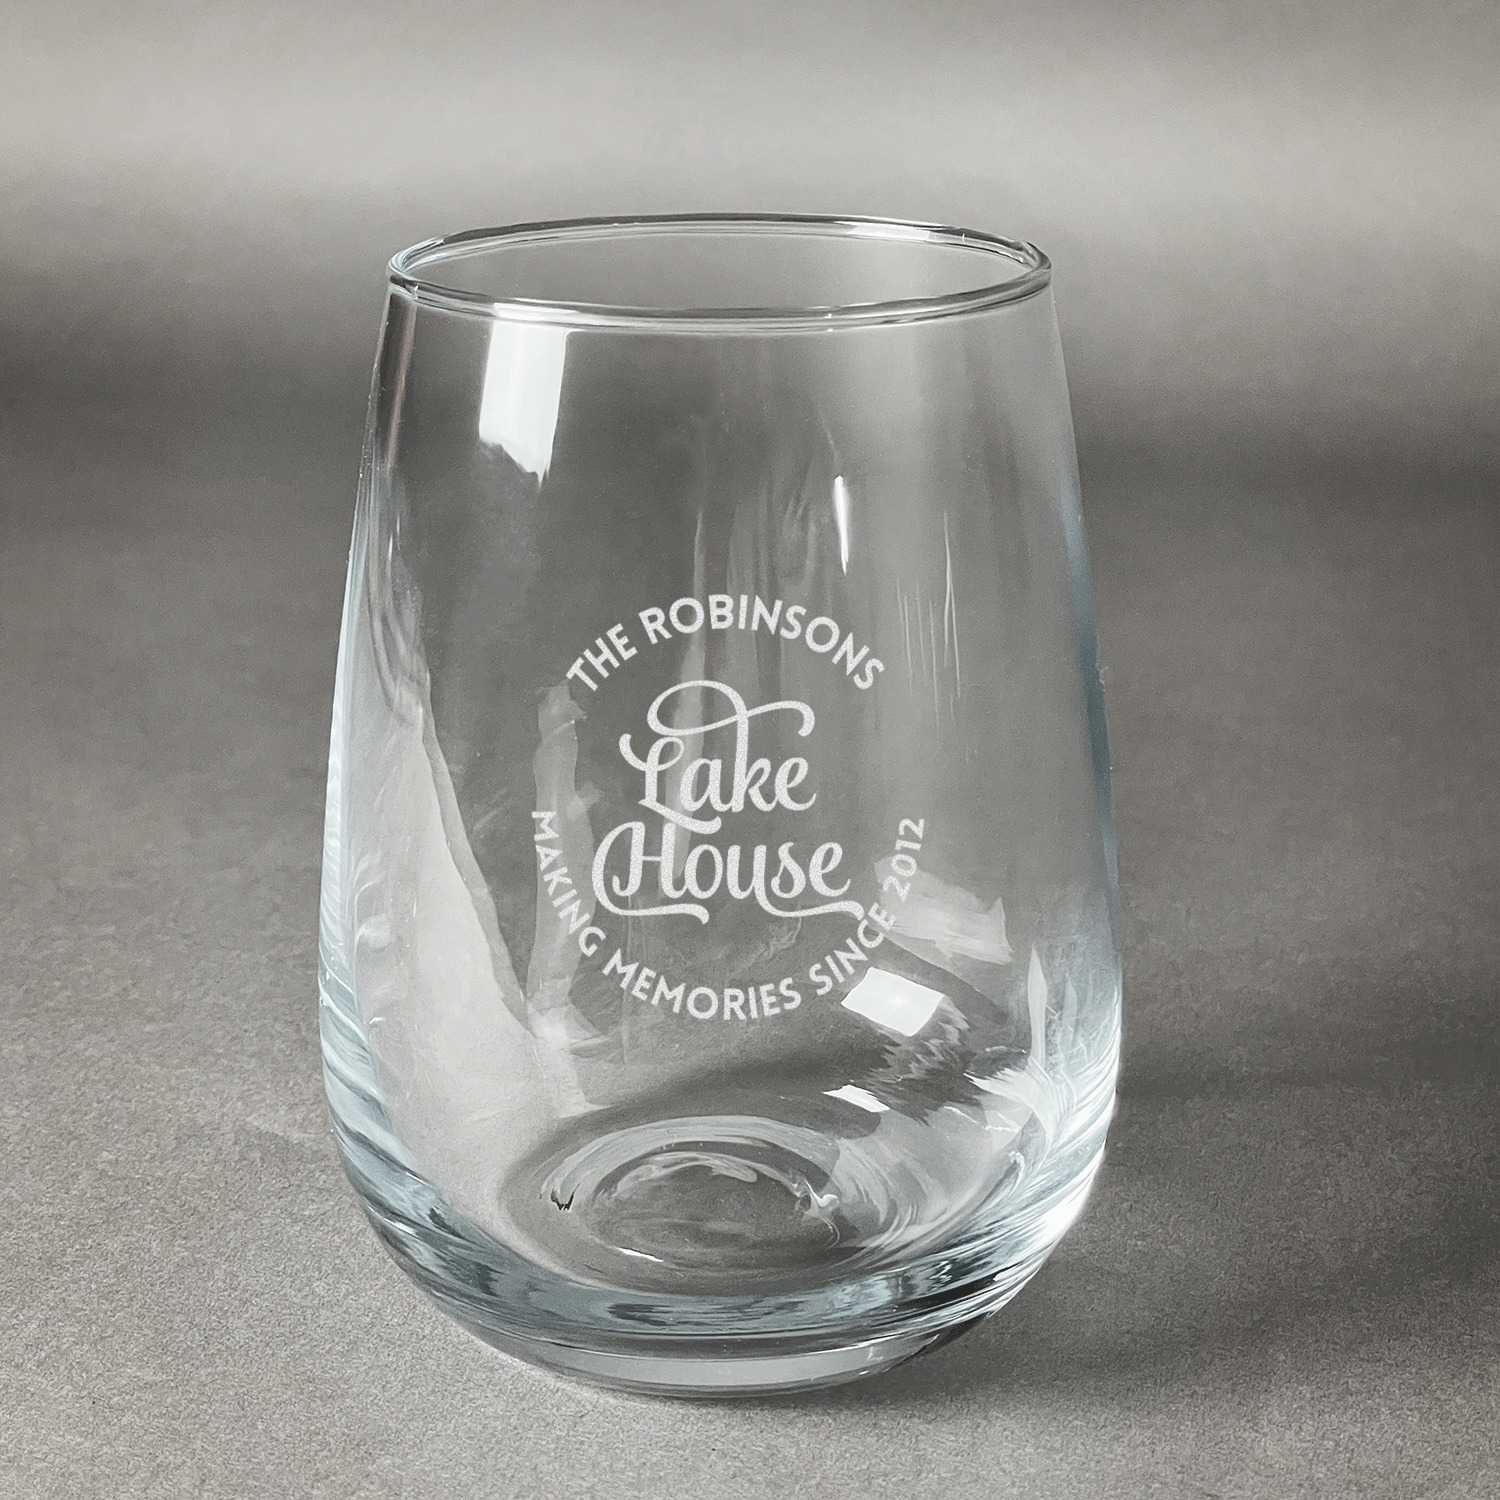 https://www.youcustomizeit.com/common/MAKE/1018278/Lake-House-2-Stemless-Wine-Glass-Front-Approval.jpg?lm=1682544408